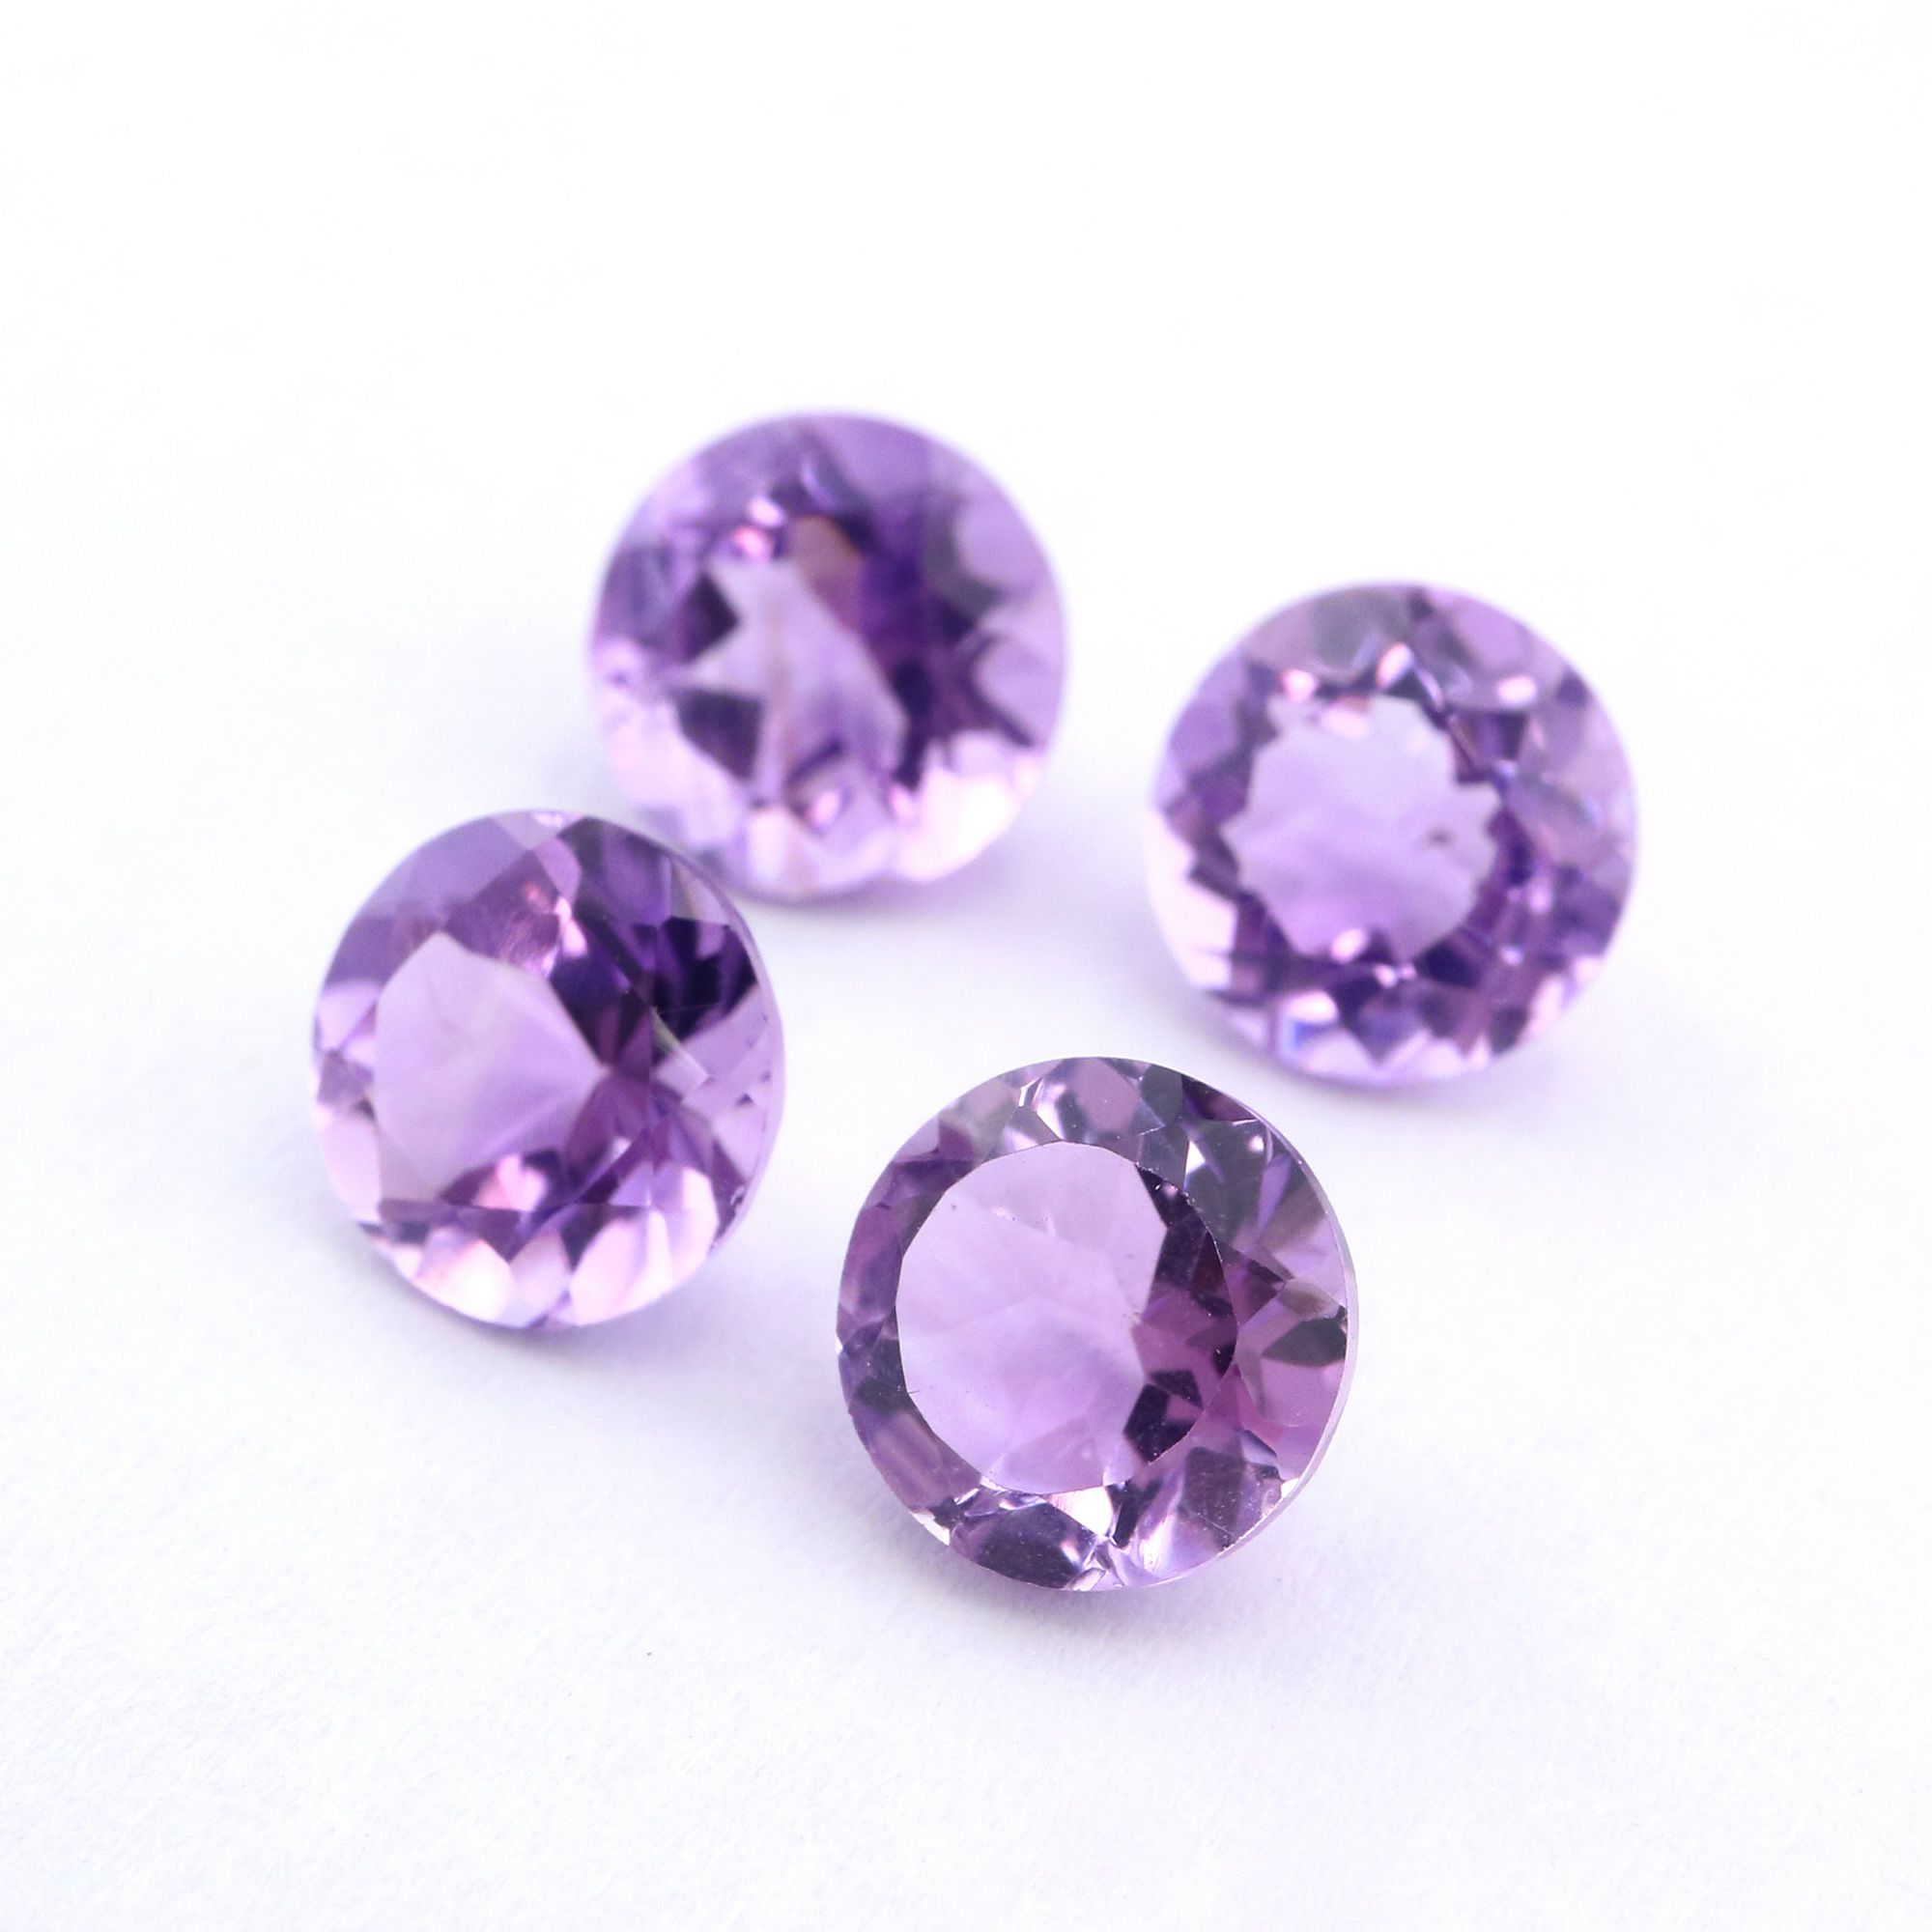 5Pcs Round Purple Amethyst February Birthstone Faceted Cut Loose Gemstone Nature Semi Precious Stone DIY Jewelry Supplies 4110169 - Click Image to Close